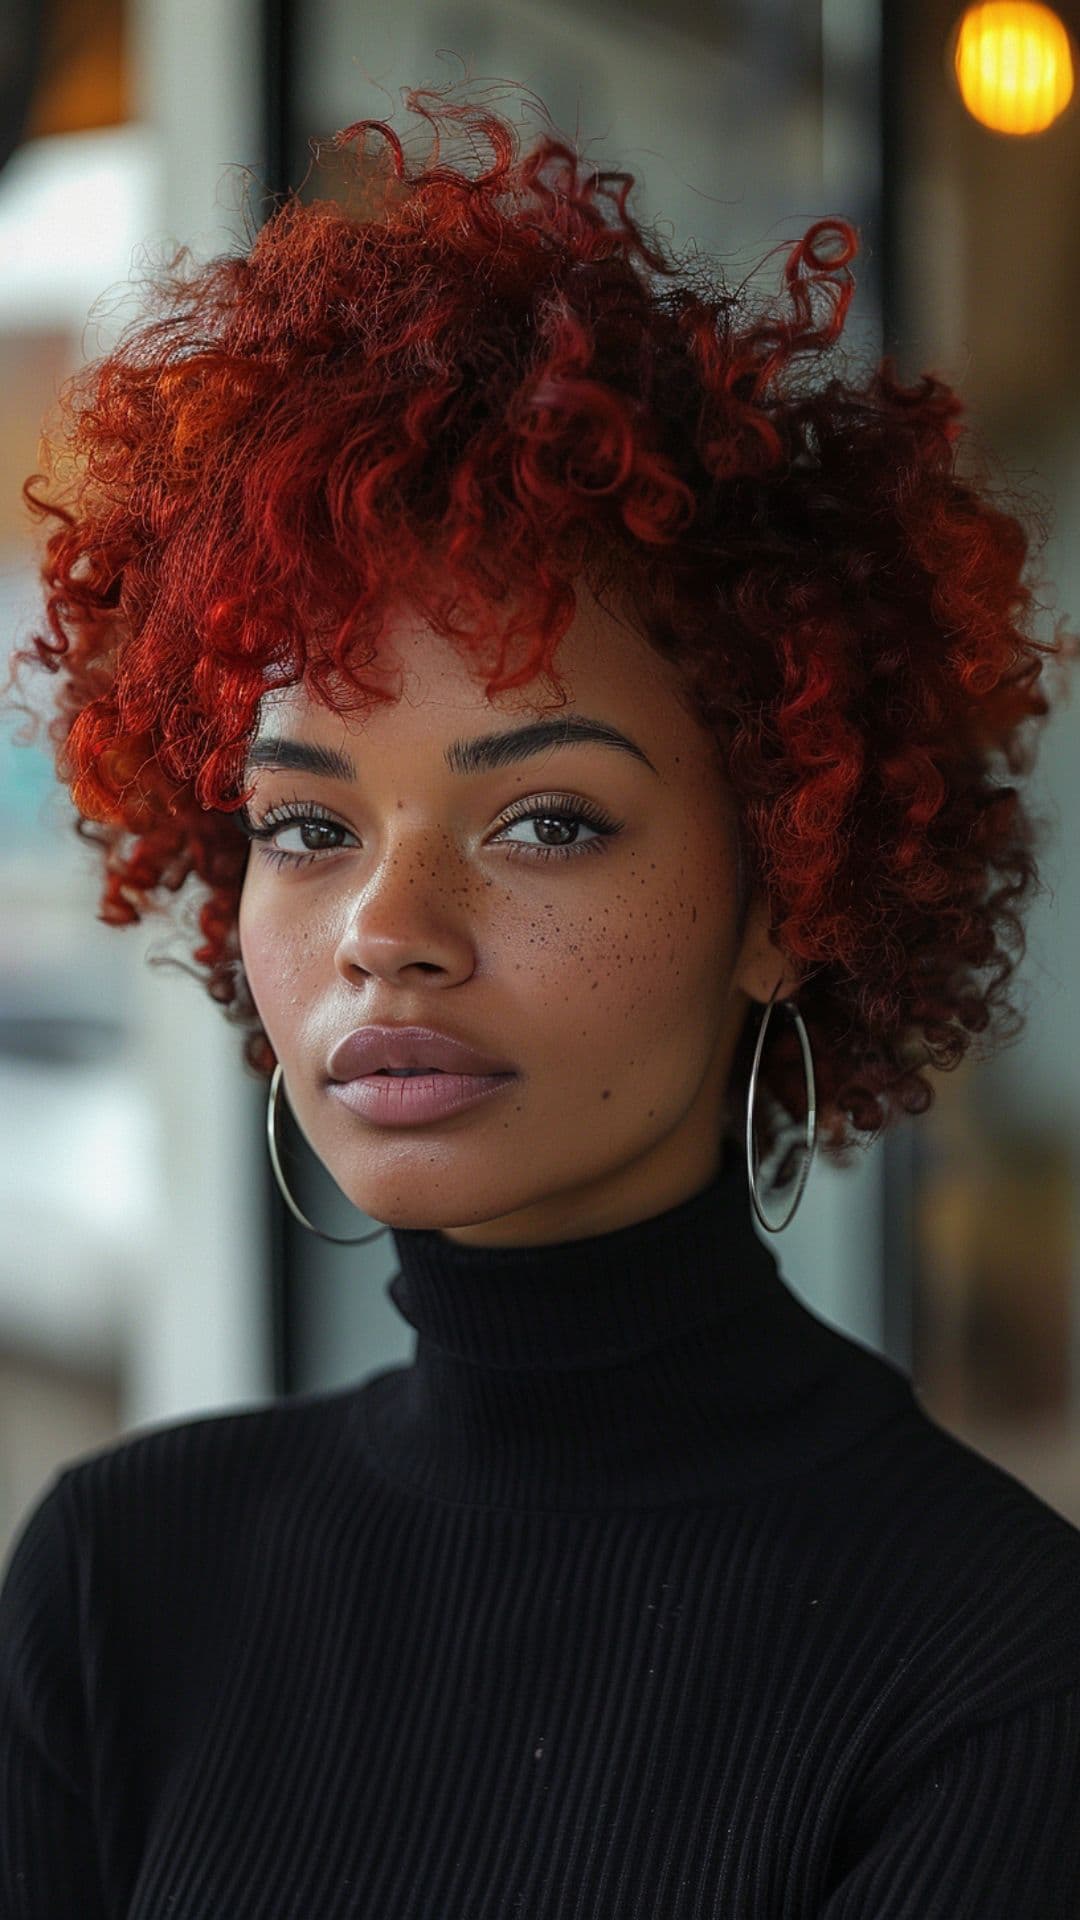 A black woman modelling a bright red afro hair.